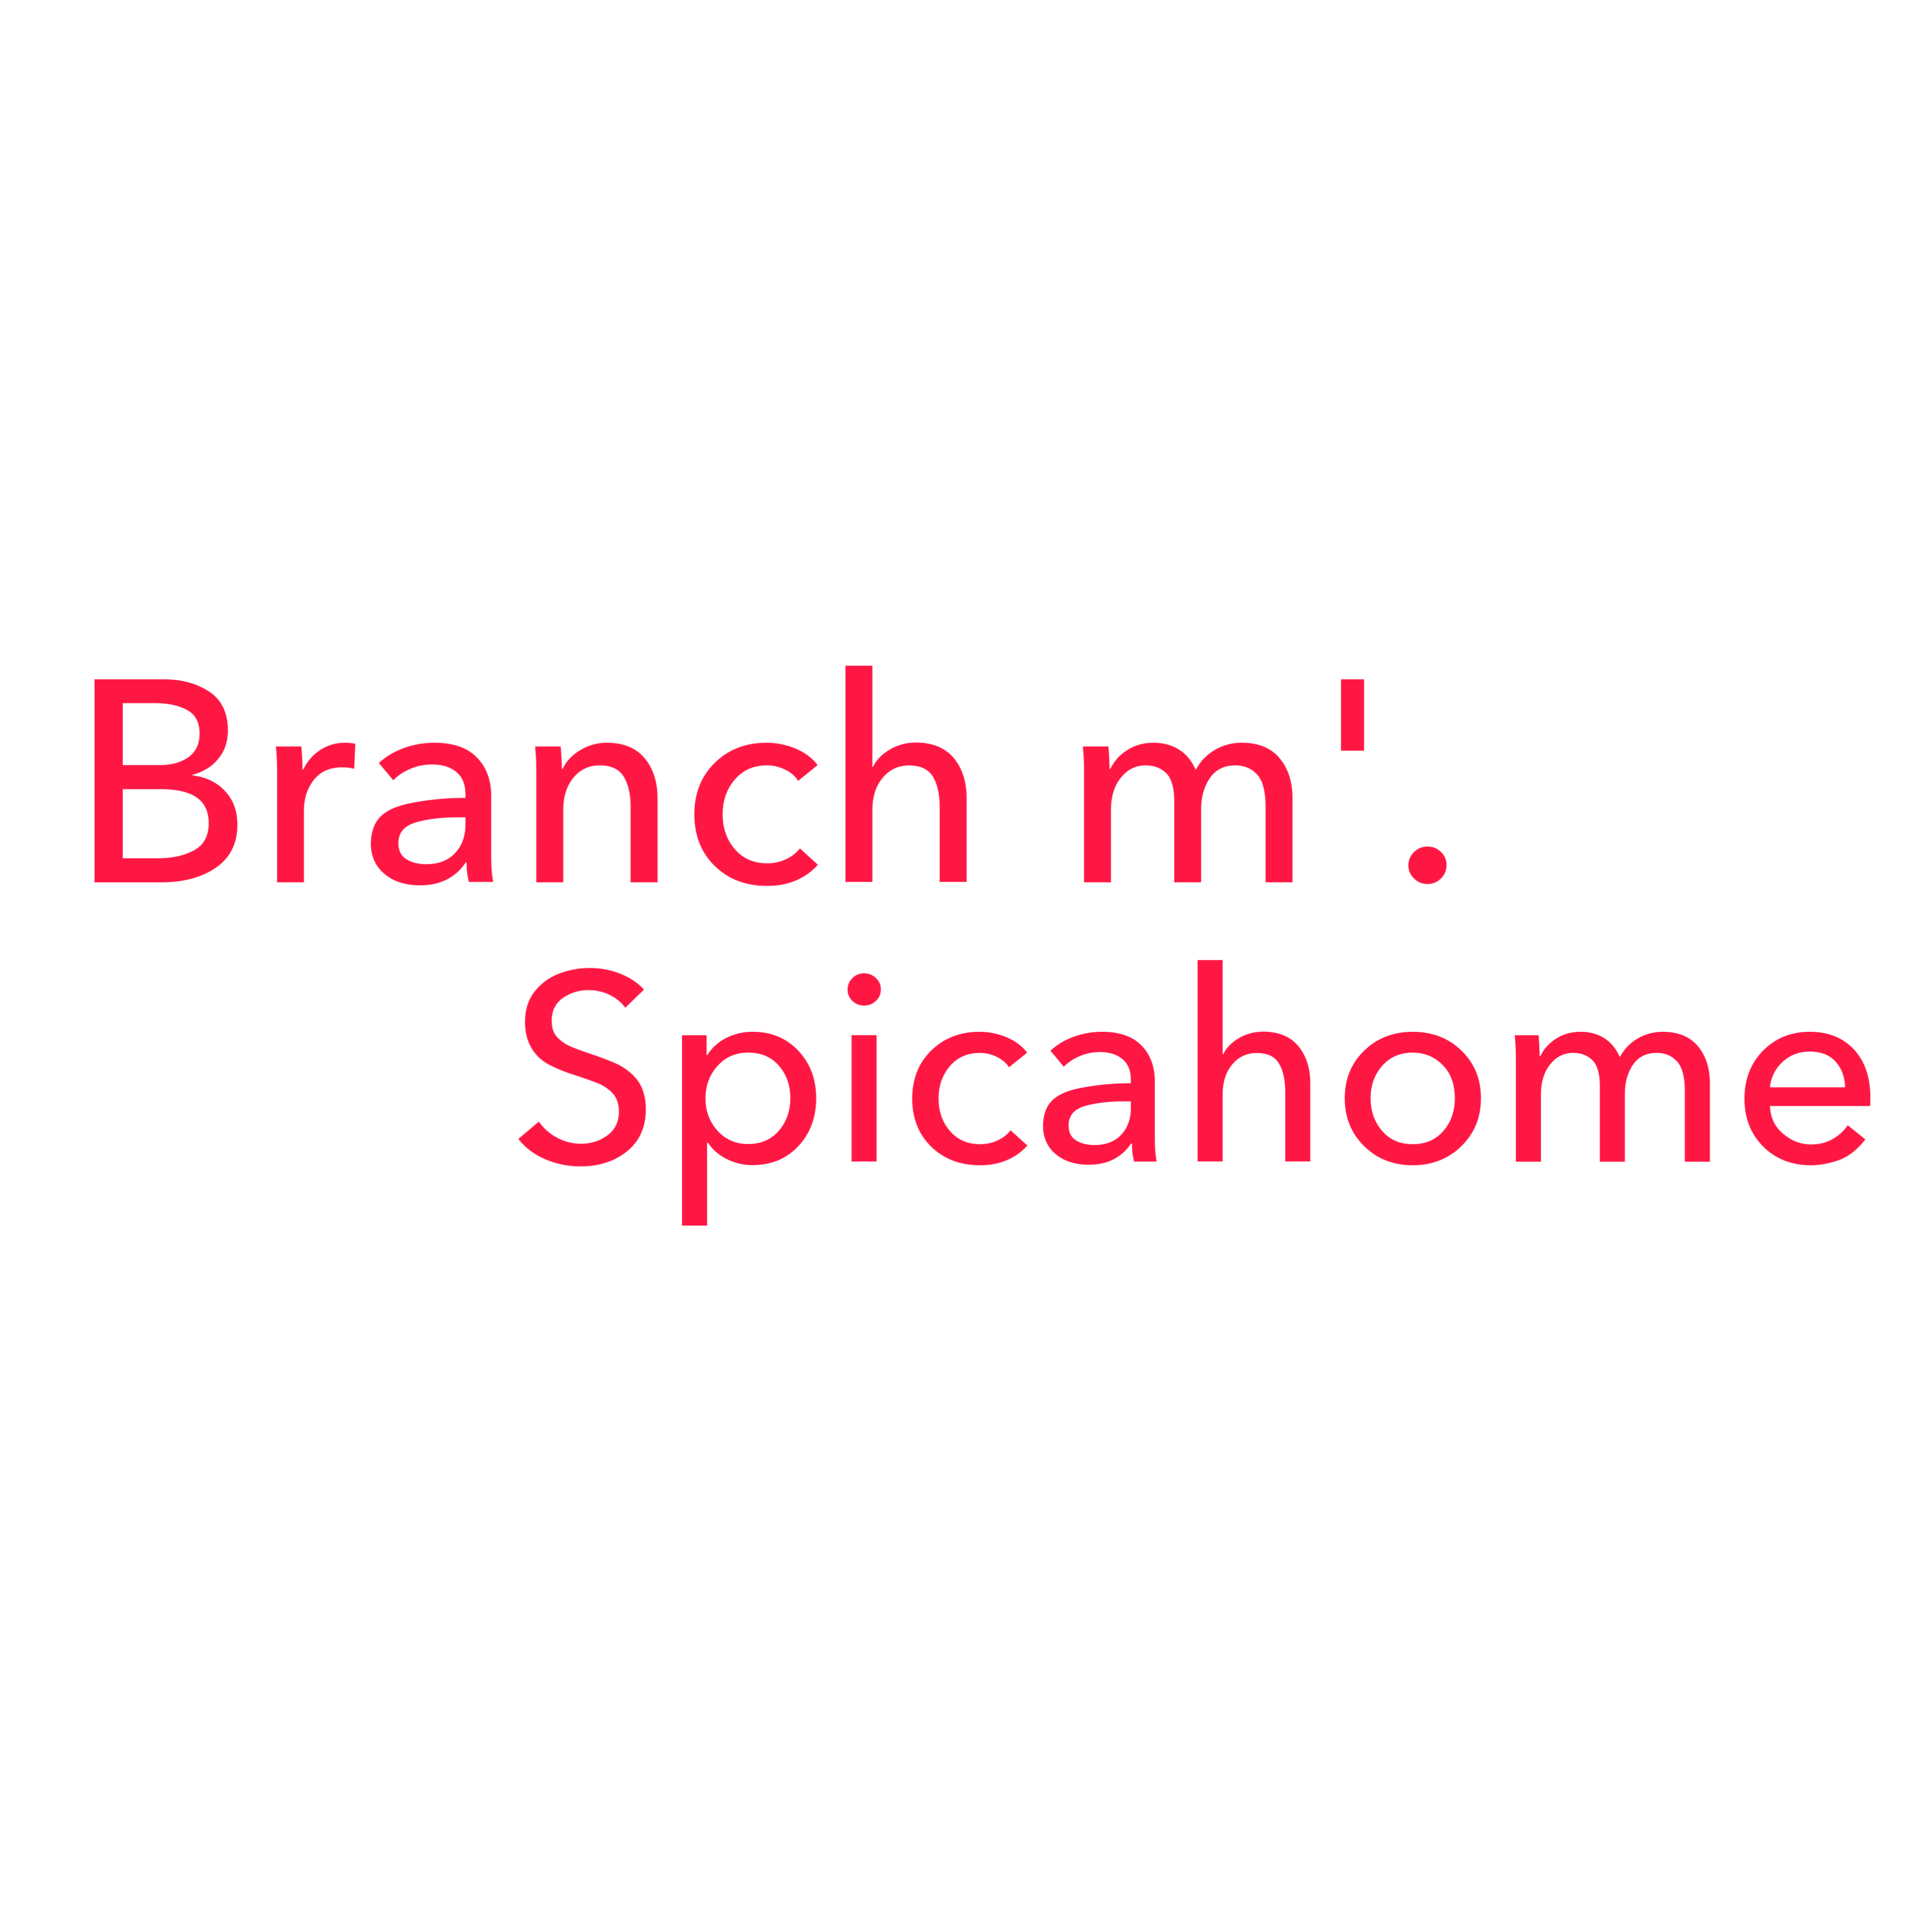 Branch m '. Spicahome